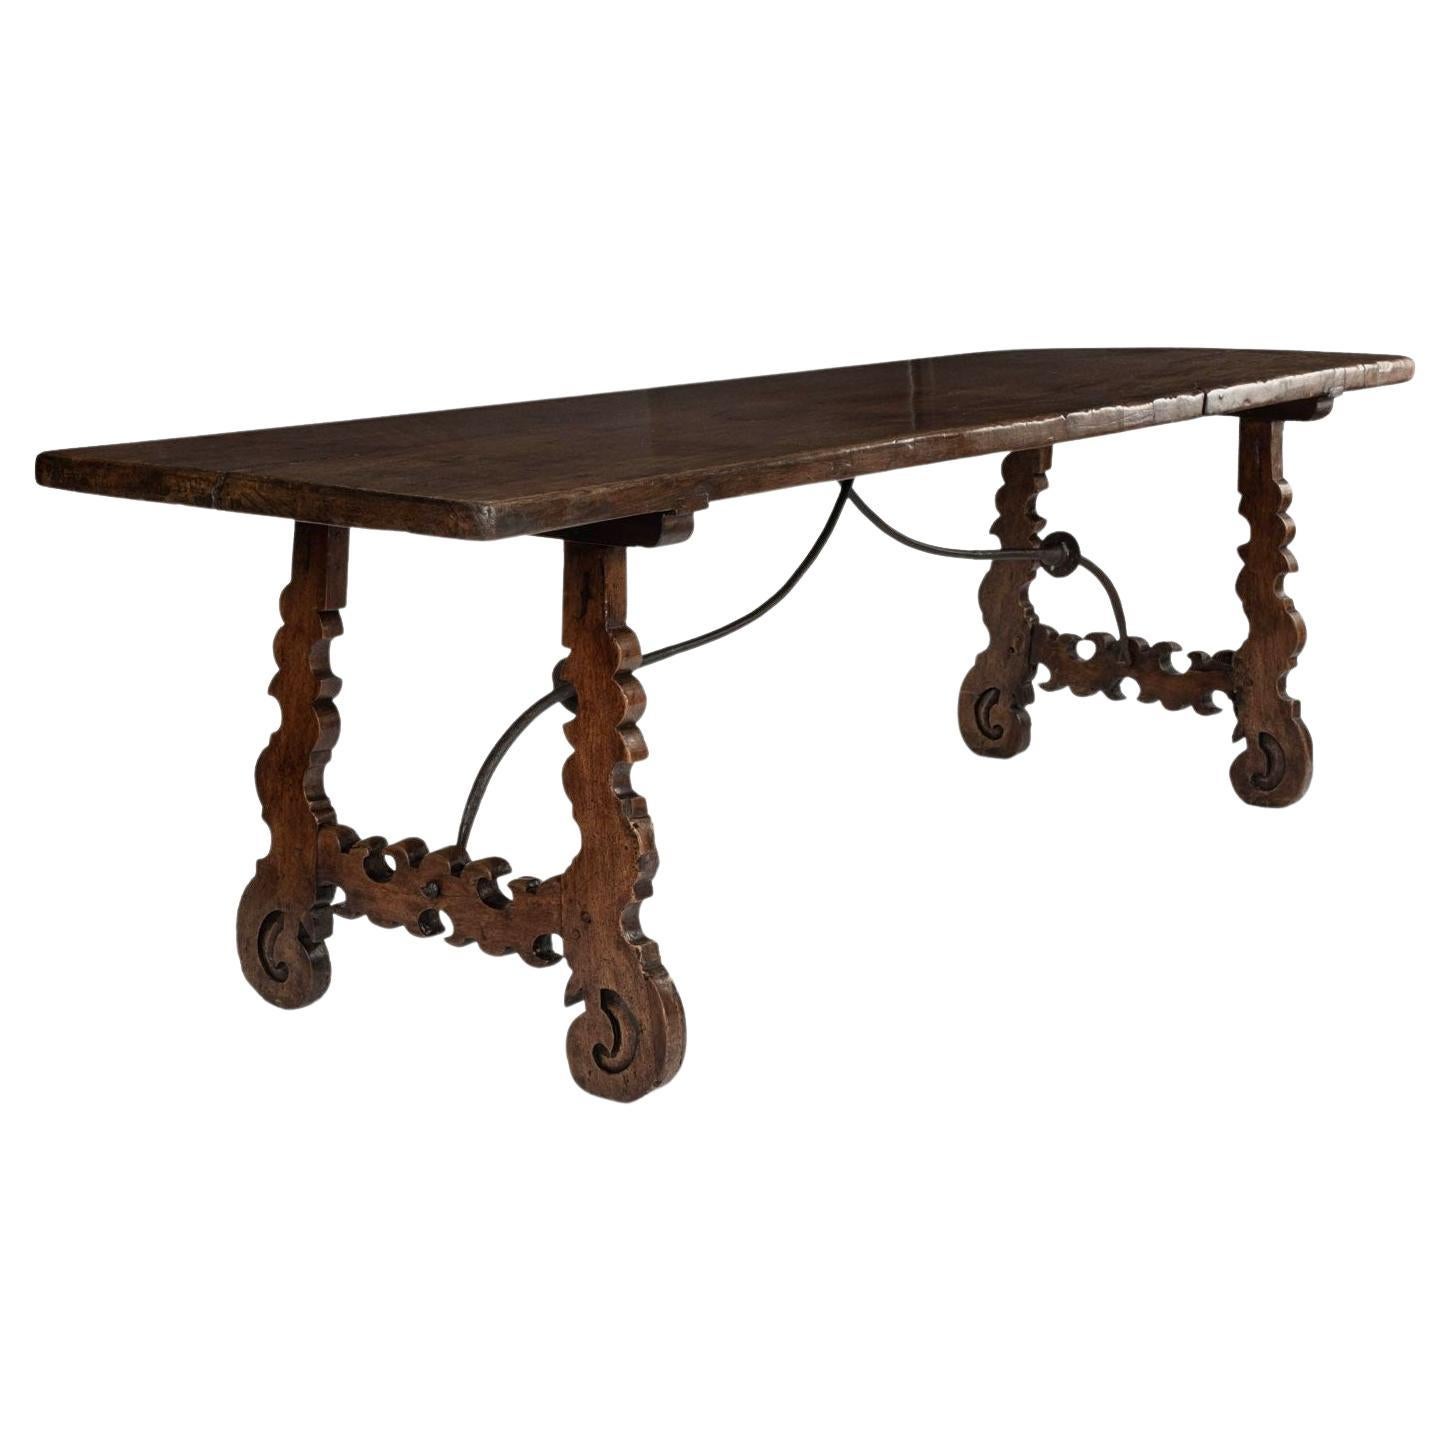 Late 17th Century Italian Walnut Dining Table or Console For Sale